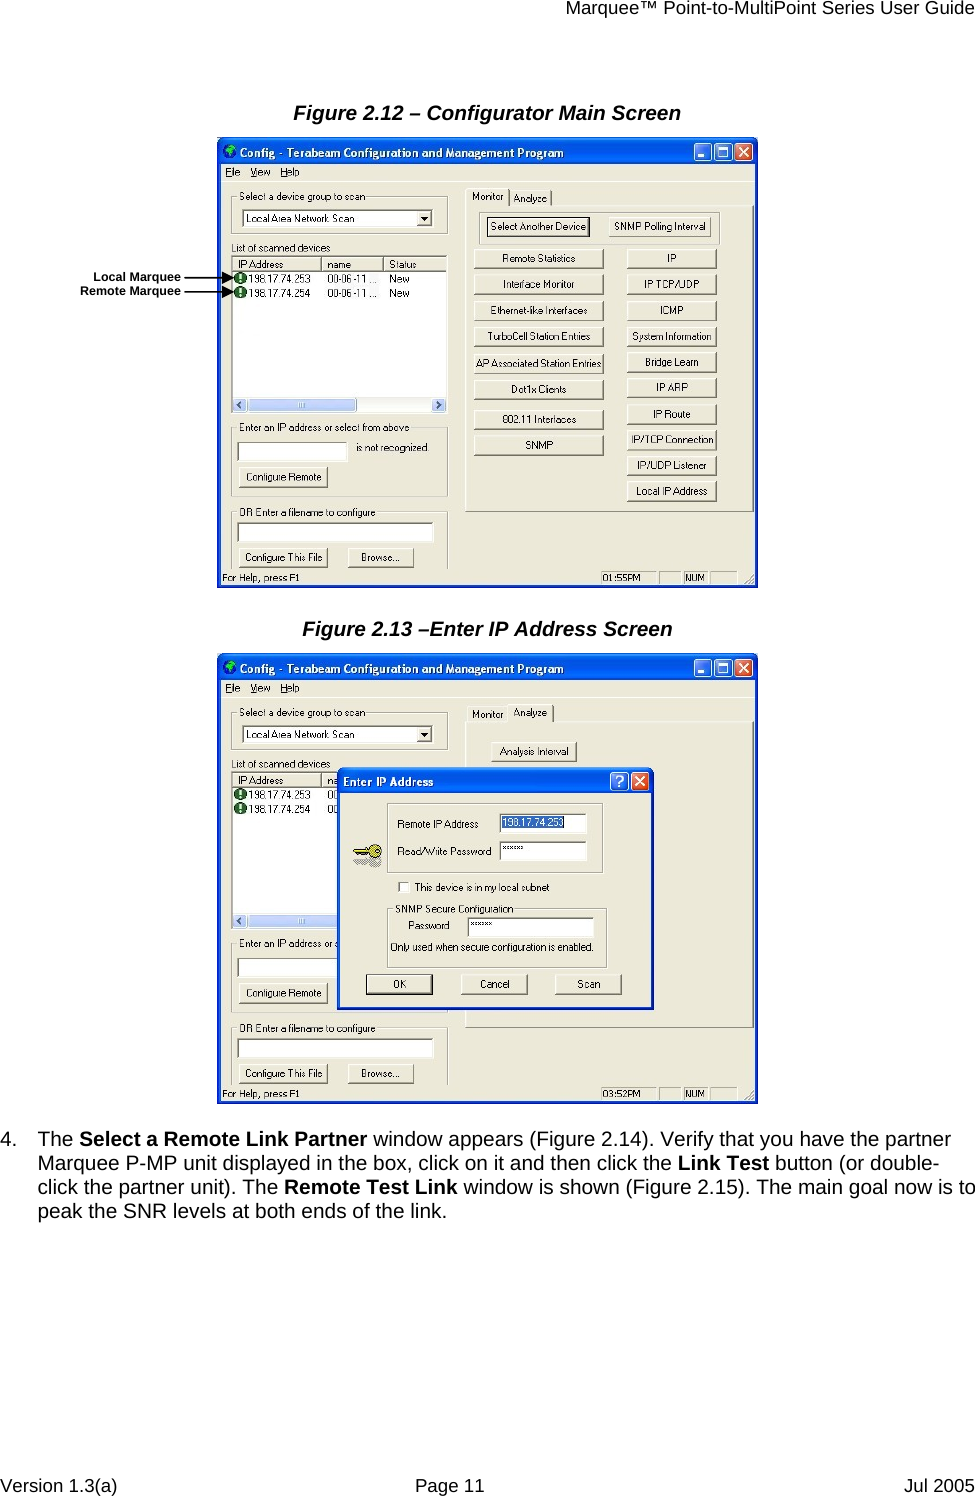     Marquee™ Point-to-MultiPoint Series User Guide Figure 2.12 – Configurator Main Screen  Local Marquee Remote Marquee Figure 2.13 –Enter IP Address Screen   4. The Select a Remote Link Partner window appears (Figure 2.14). Verify that you have the partner Marquee P-MP unit displayed in the box, click on it and then click the Link Test button (or double-click the partner unit). The Remote Test Link window is shown (Figure 2.15). The main goal now is to peak the SNR levels at both ends of the link.  Version 1.3(a)  Page 11  Jul 2005 